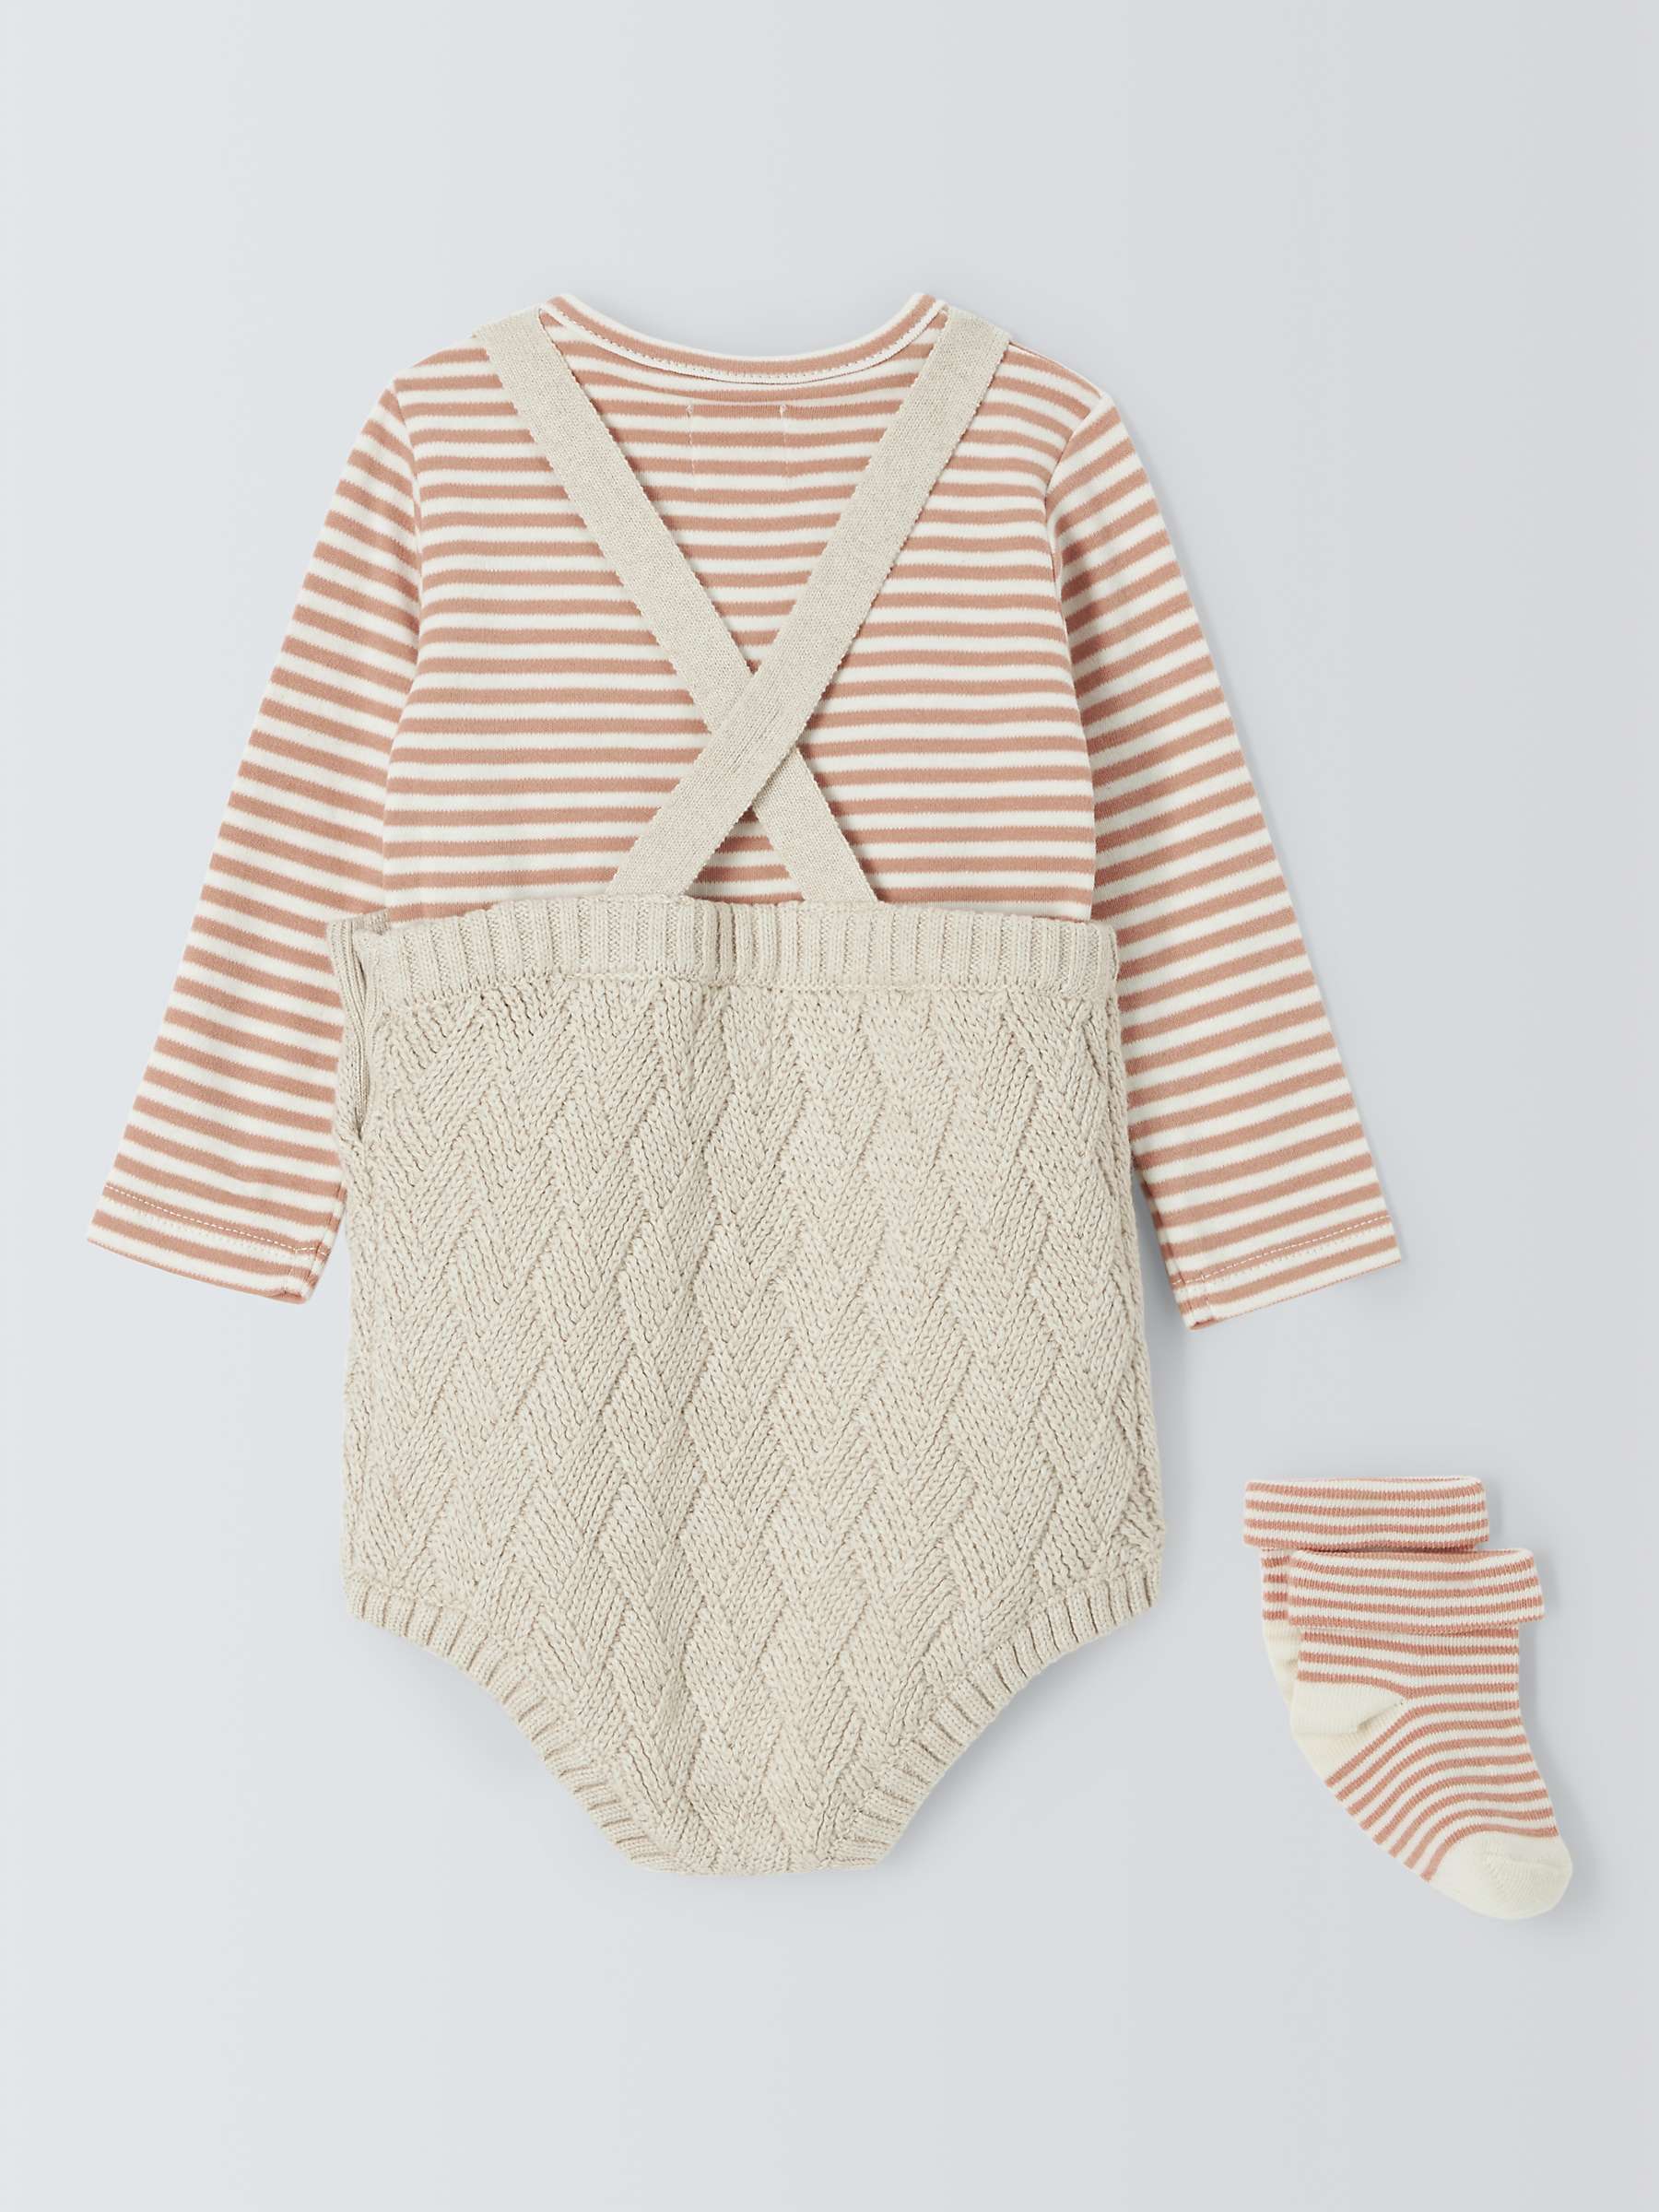 Buy John Lewis Baby Knitted Dungaree Bodysuit, T-Shirt and Socks Set, Neutrals Online at johnlewis.com